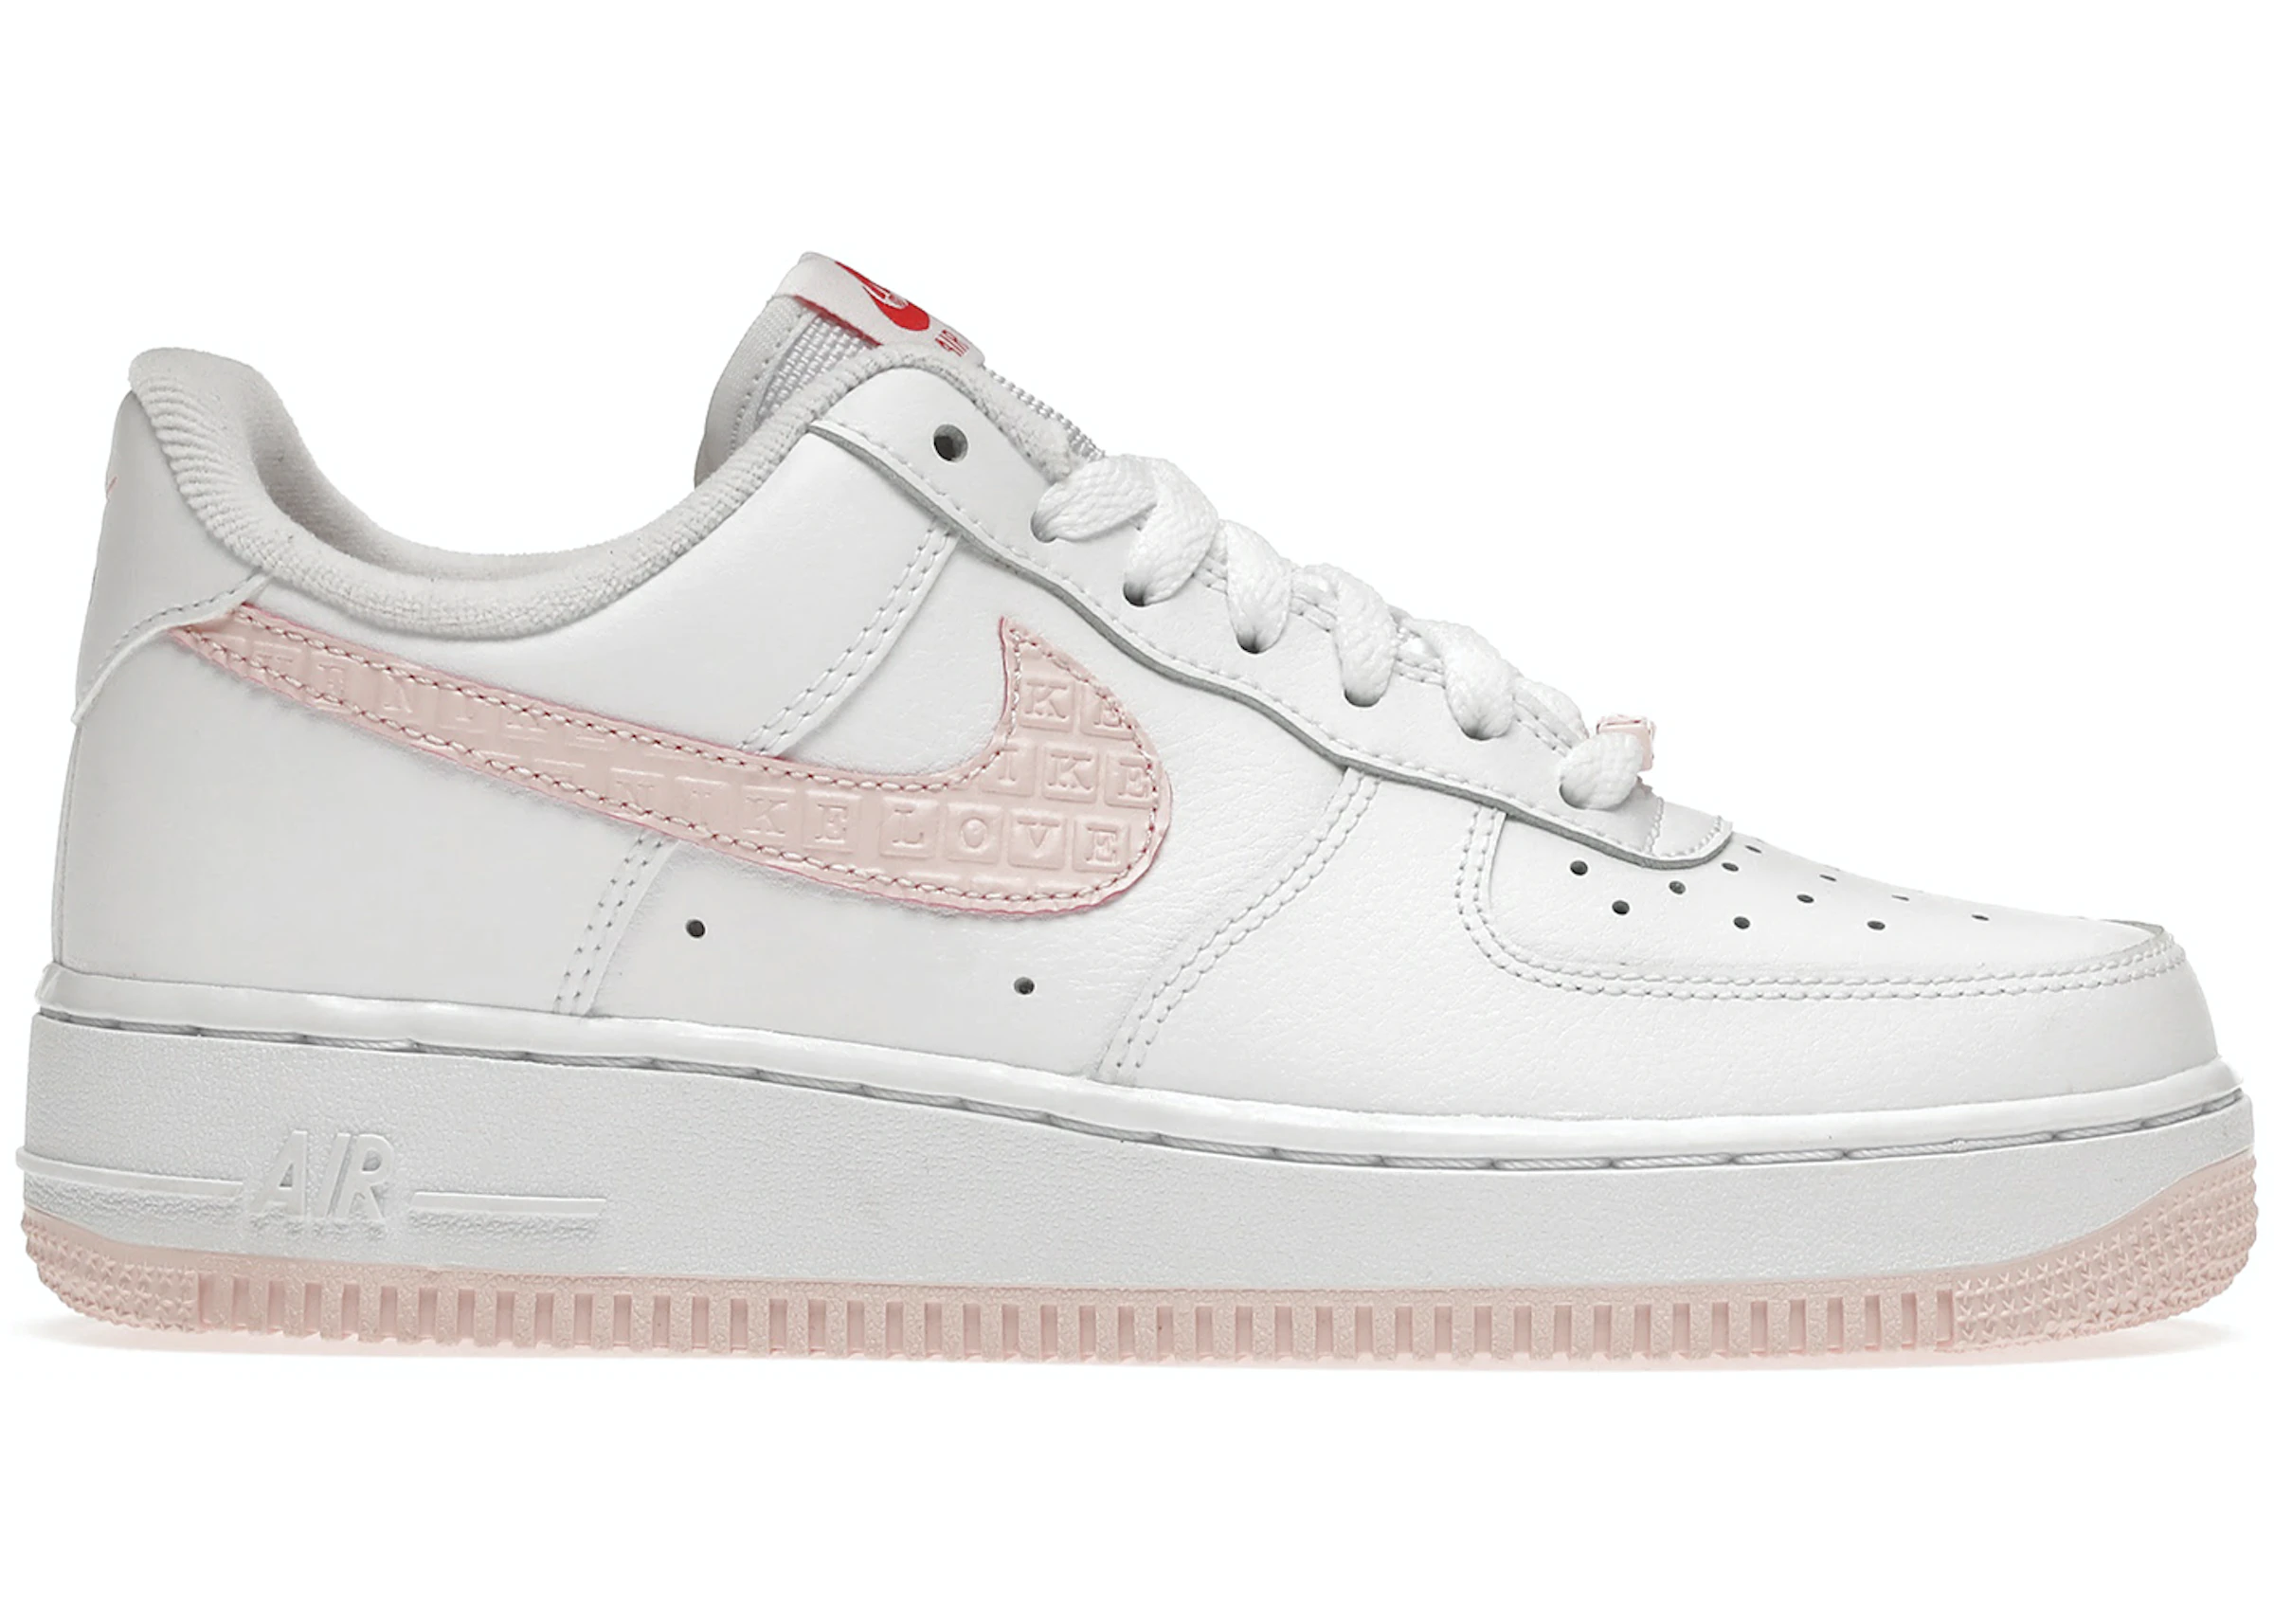 dialect bende Republikeinse partij Nike Air Force 1 Low VD Valentine's Day (2022) (Women's) - DQ9320-100 - US